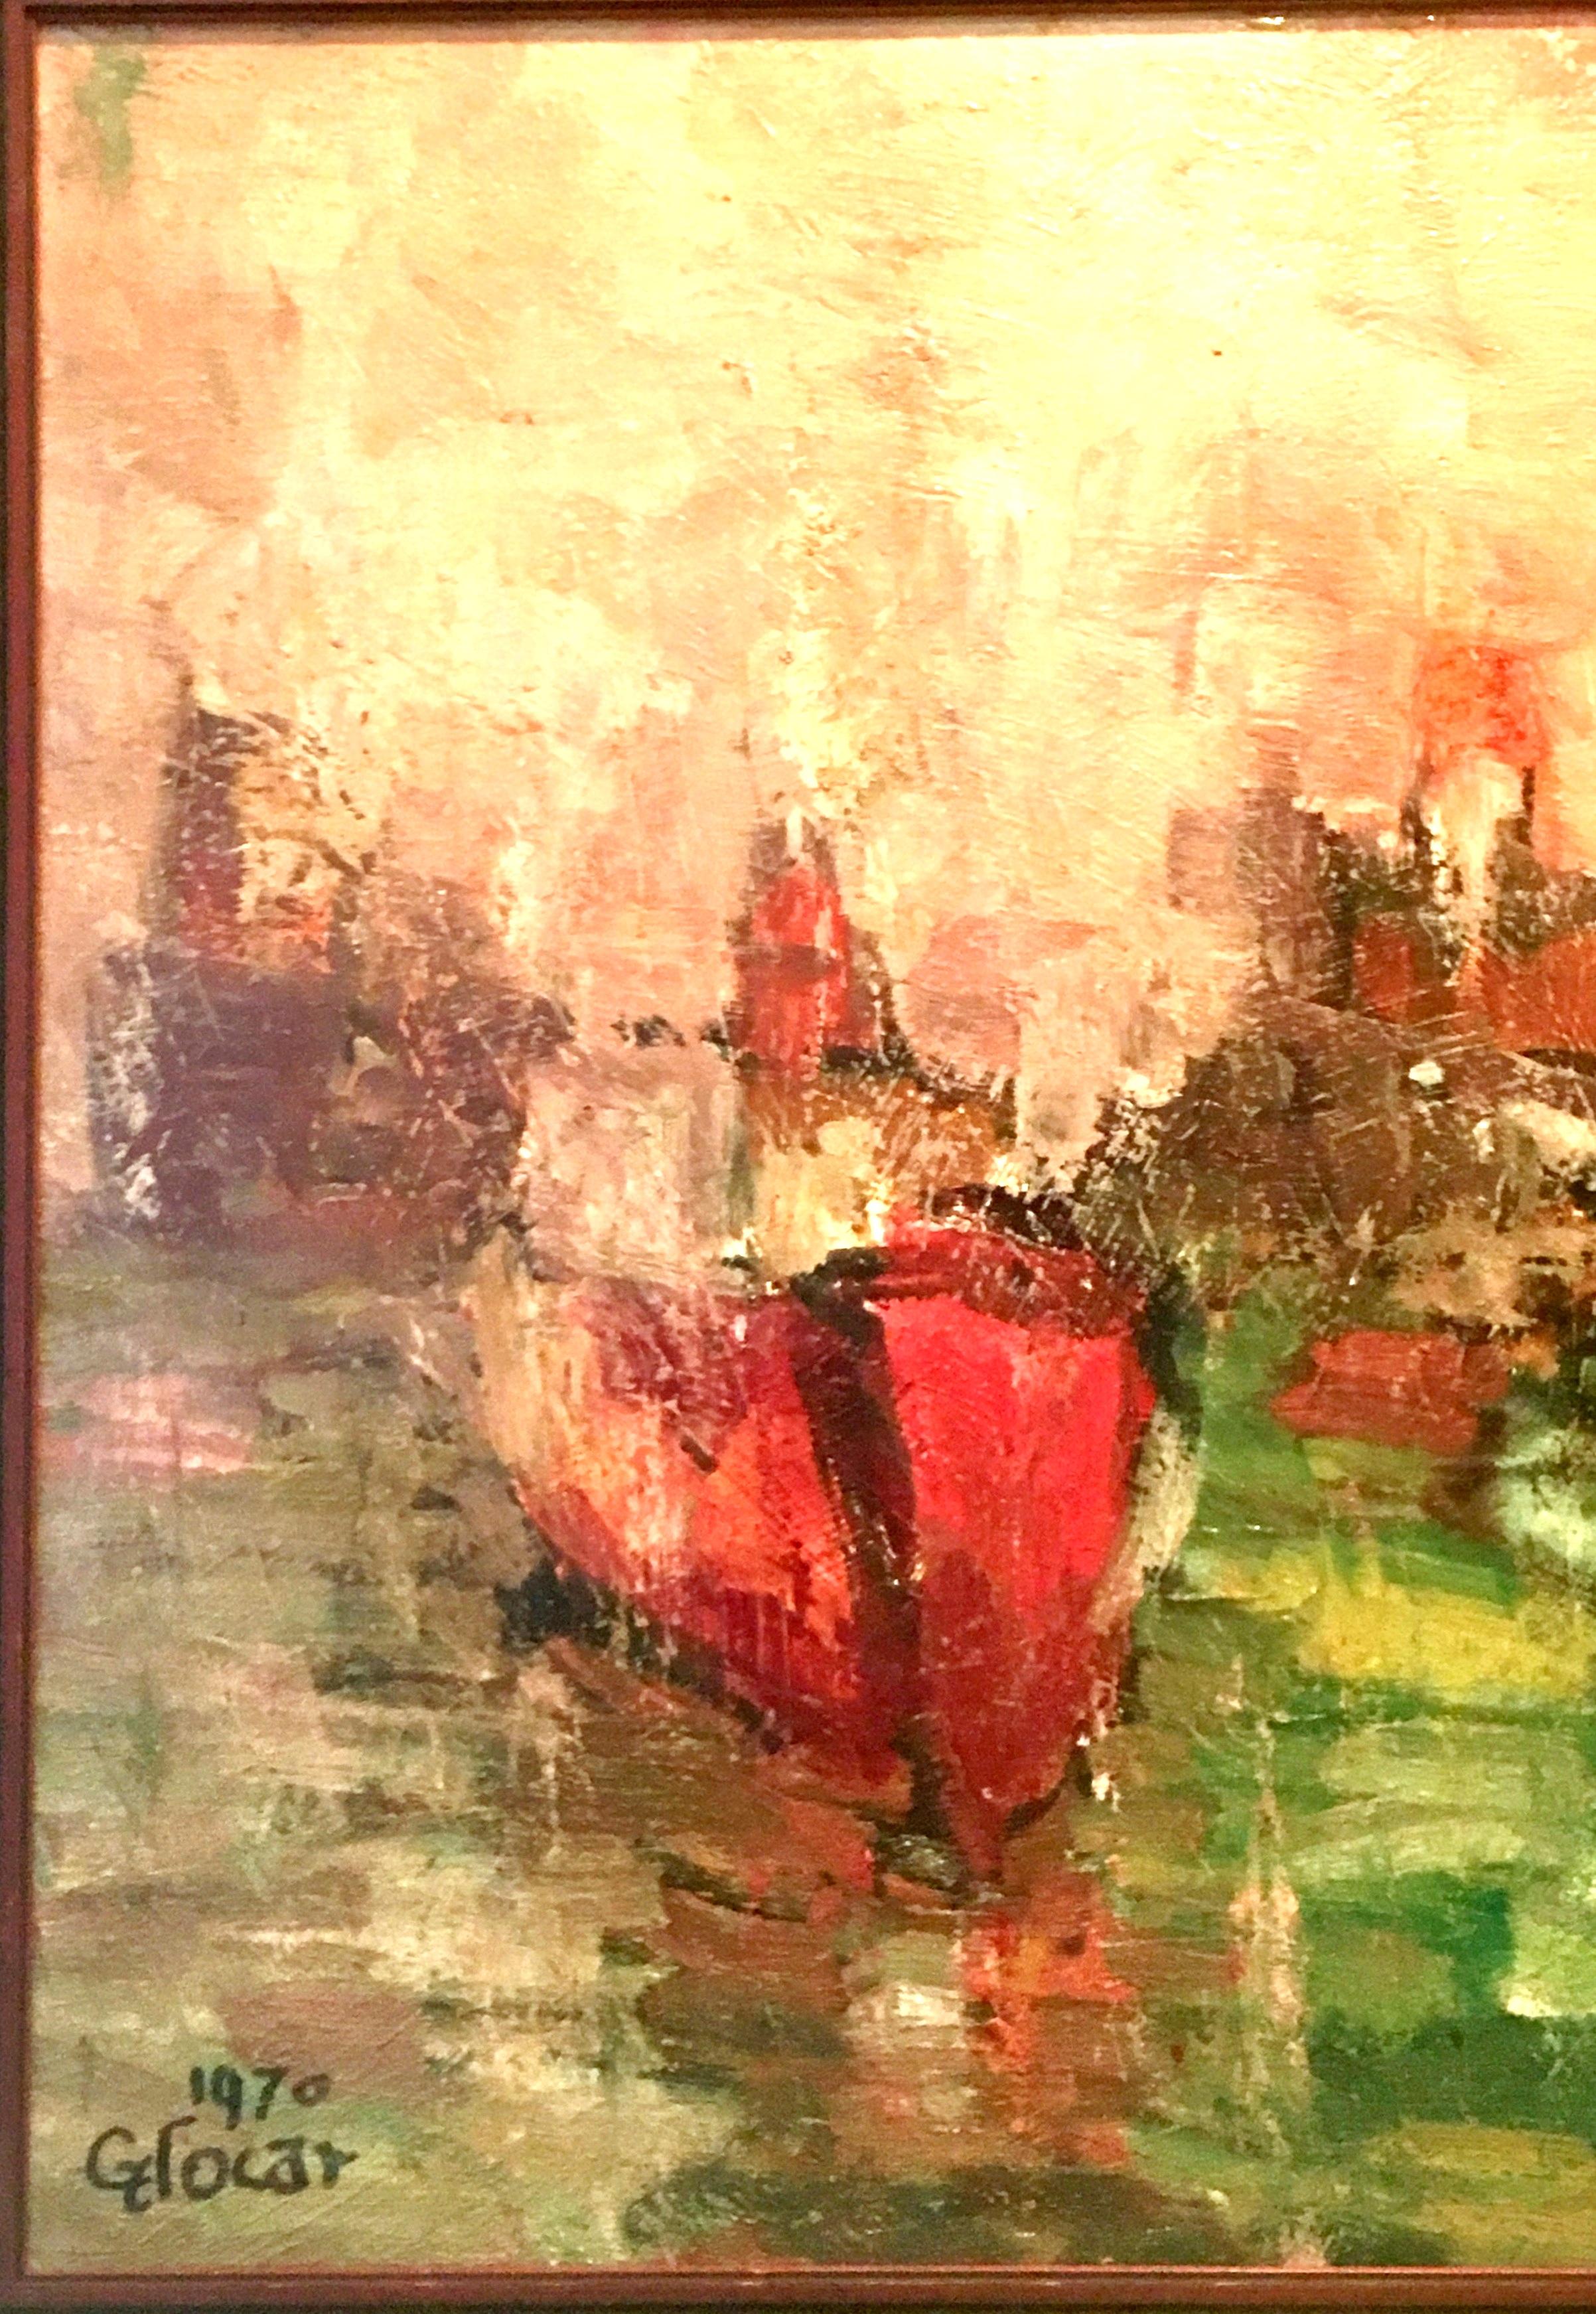 1970 Original Oil on Canvas Abstract Painting by, Emilan Glocar In Good Condition For Sale In West Palm Beach, FL